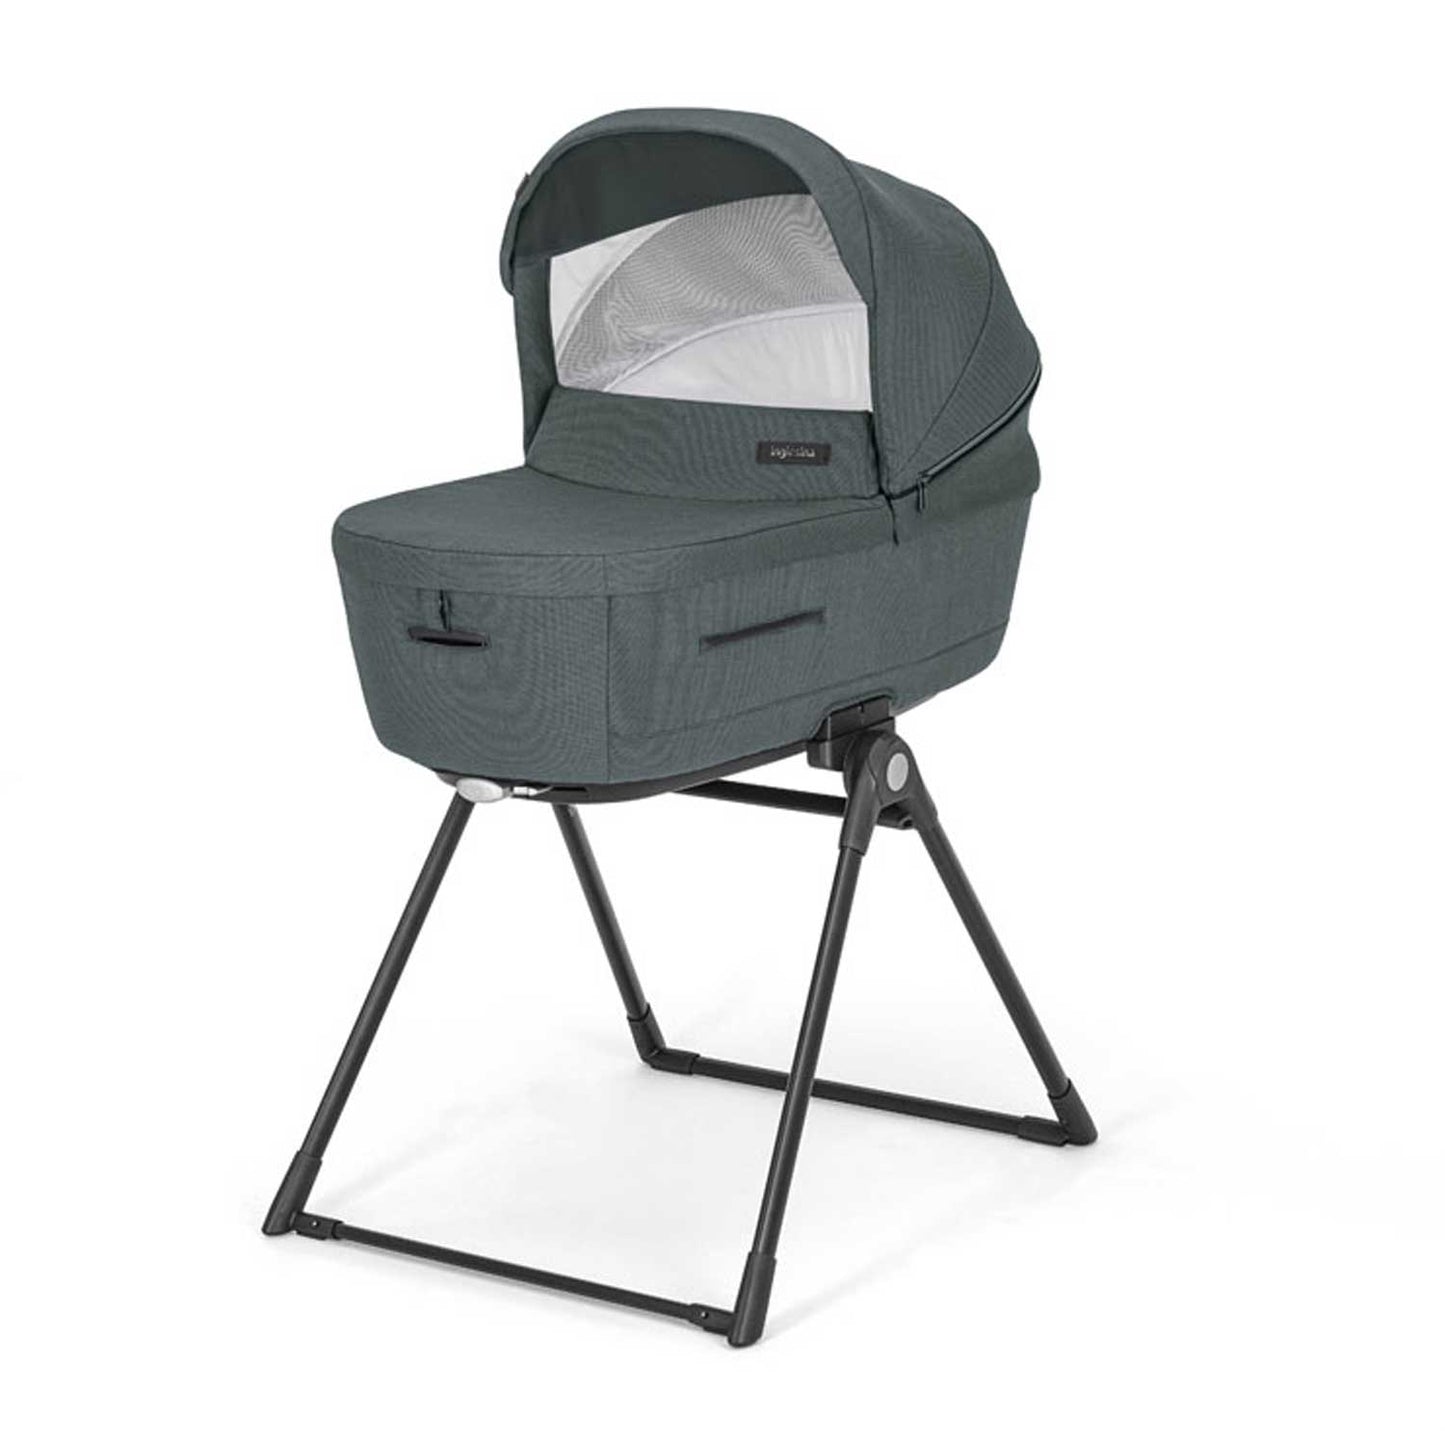 Inglesina - Trio Aptica System Quattro with Darwin Infant Recline including Frame and StandUp